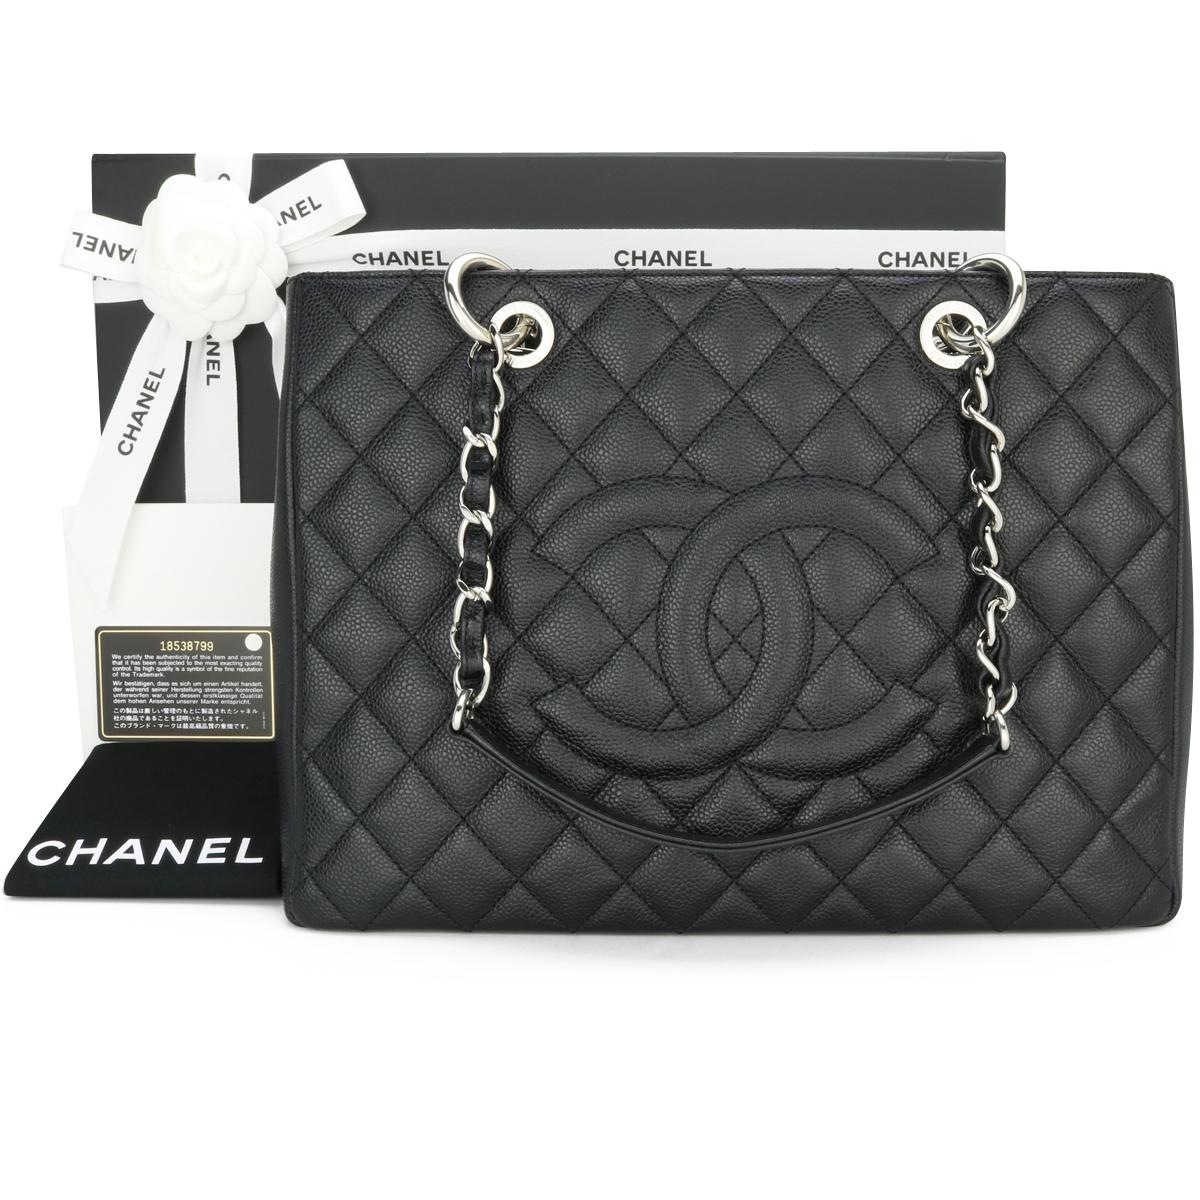 CHANEL Grand Shopping Tote (GST) Black Caviar with Silver Hardware 2014.

This bag is in excellent condition, the bag still holds its original shape, and the hardware is still very shiny.

As Chanel has discontinued the Grand Shopping Tote (GST), it